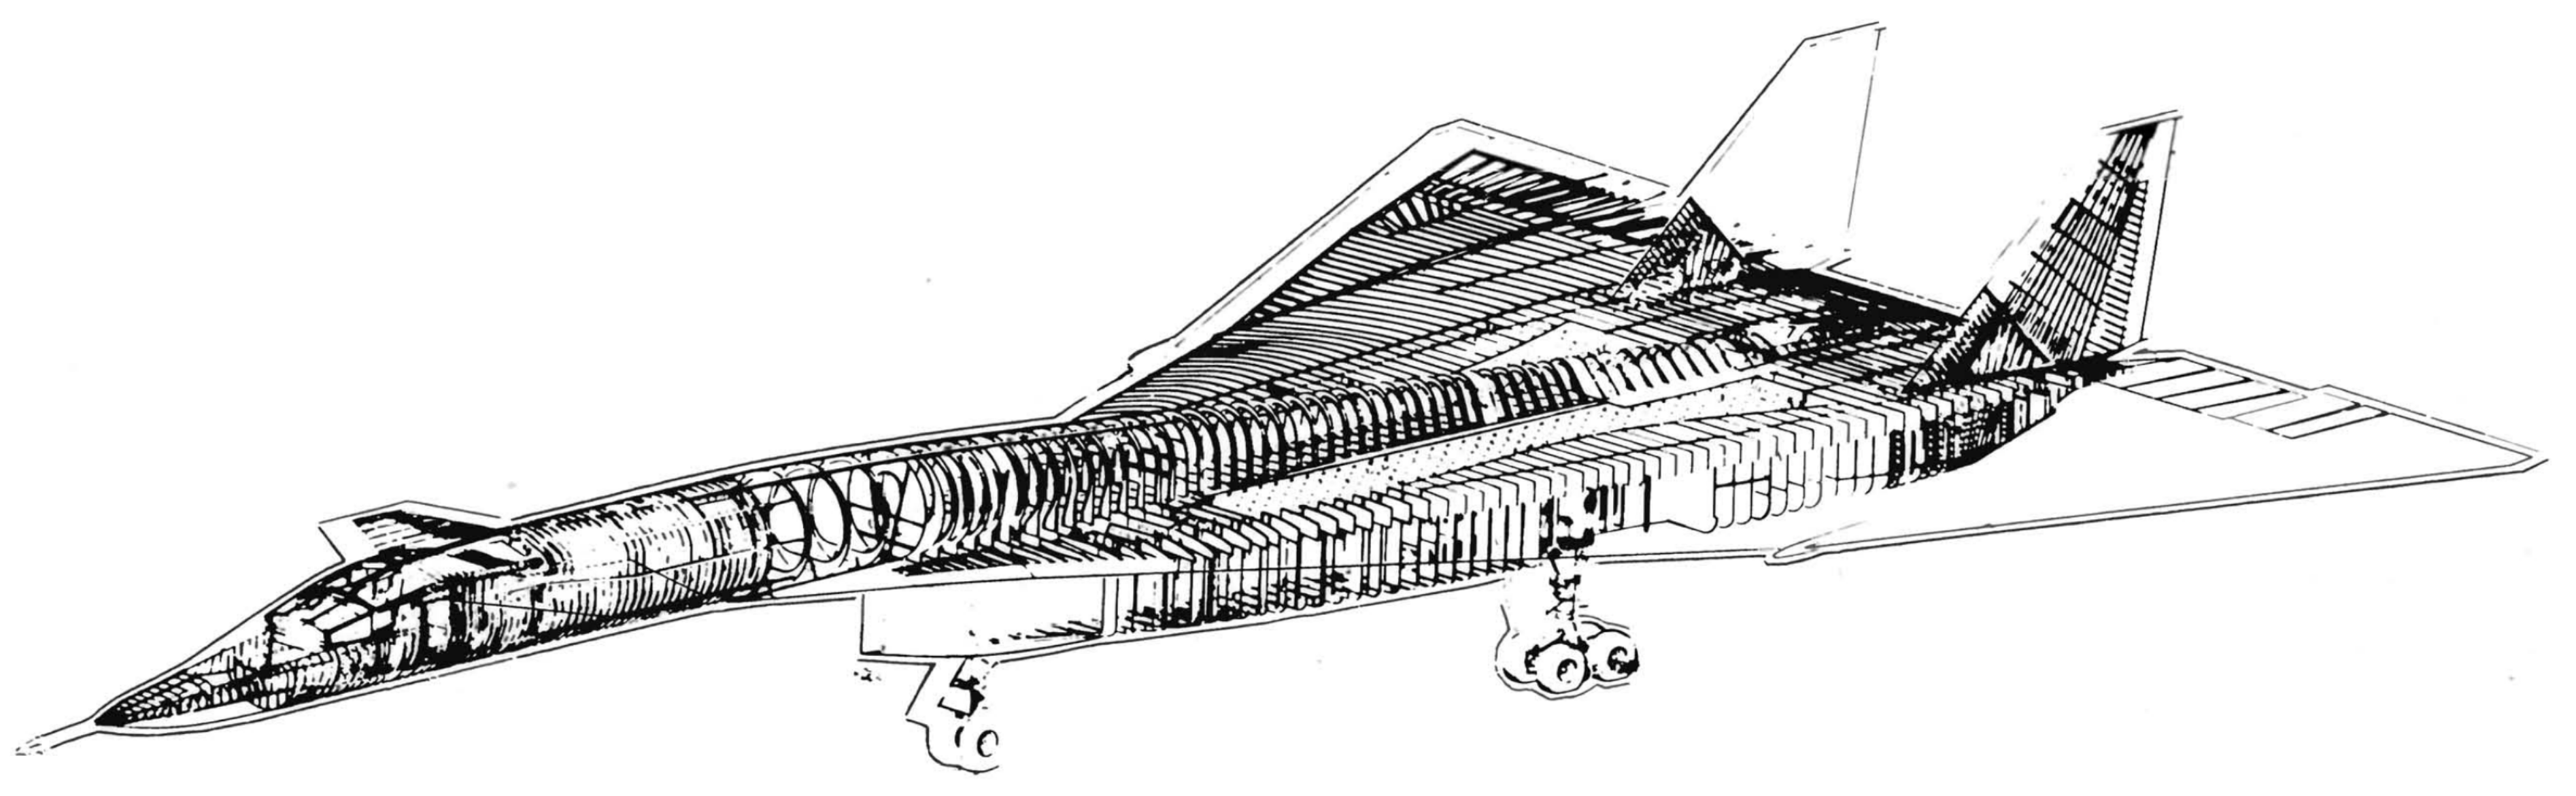 xb-70_airframe.png